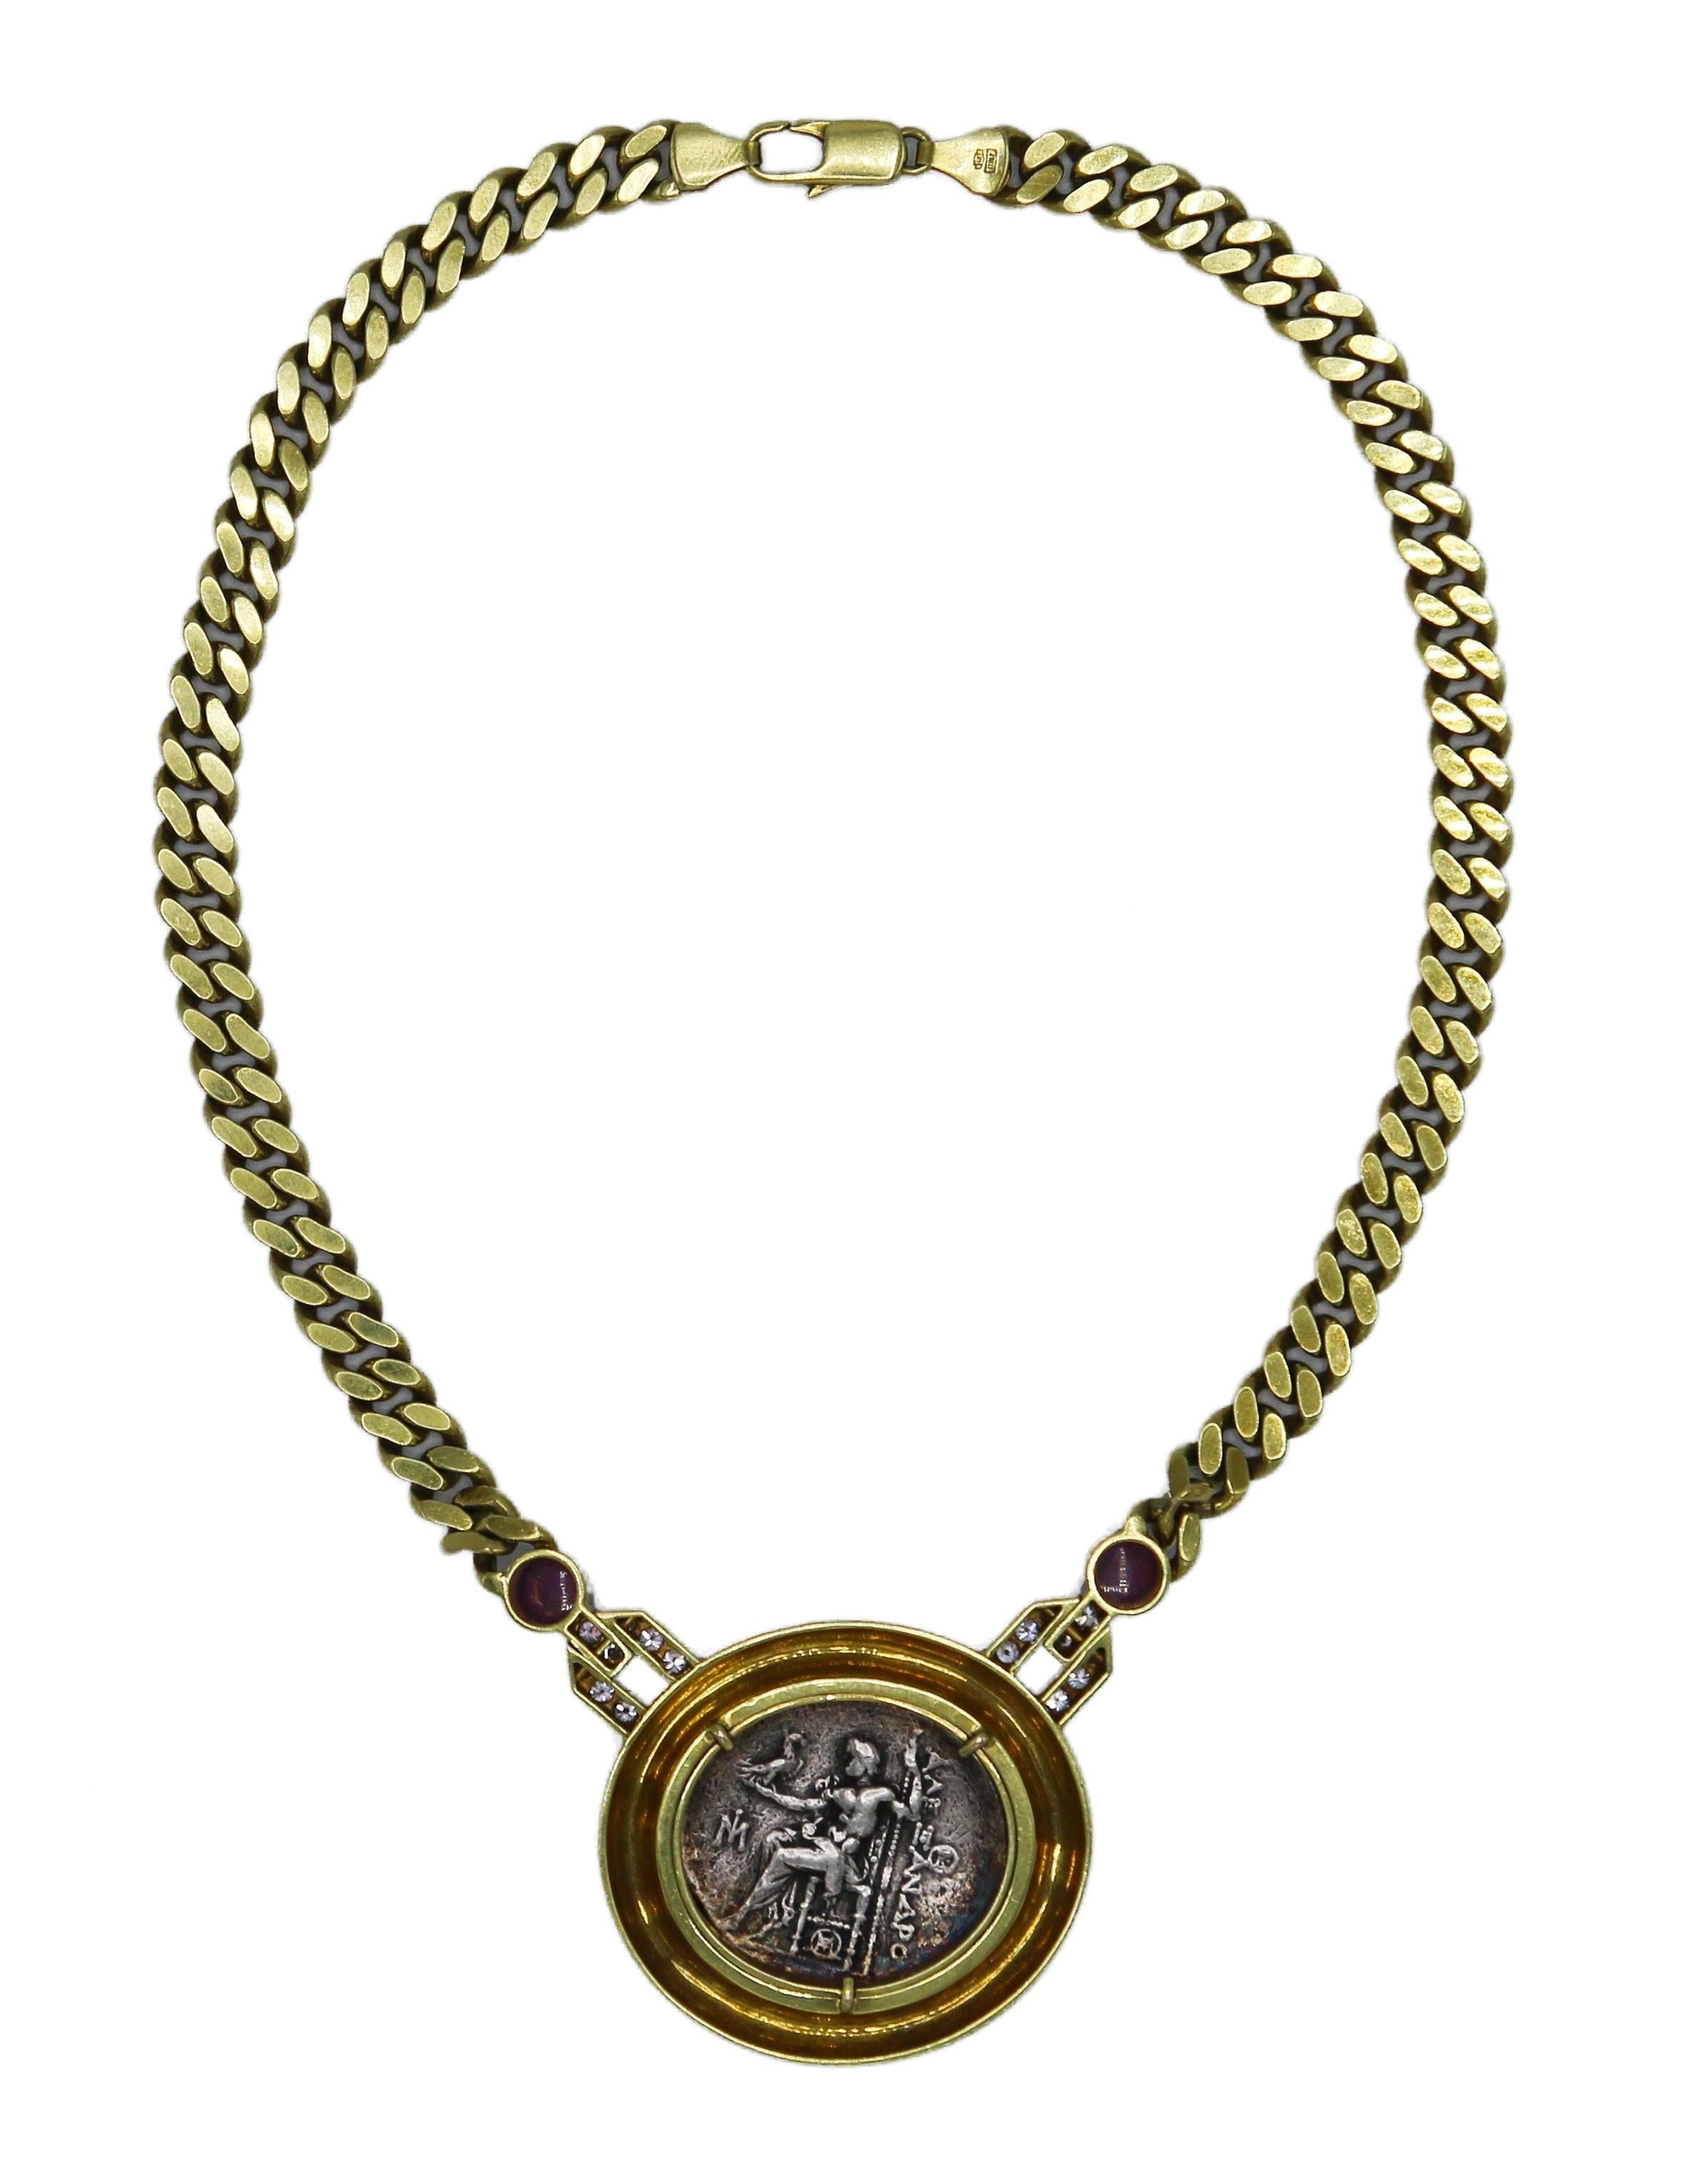 14 karat yellow gold, ancient Roman coin, ruby and diamond necklace, Italy, designed as a flat curblink chain supporting a pendant set with an ancient Roman coin within a polished yellow gold frame, set at the sides with round diamonds weighing